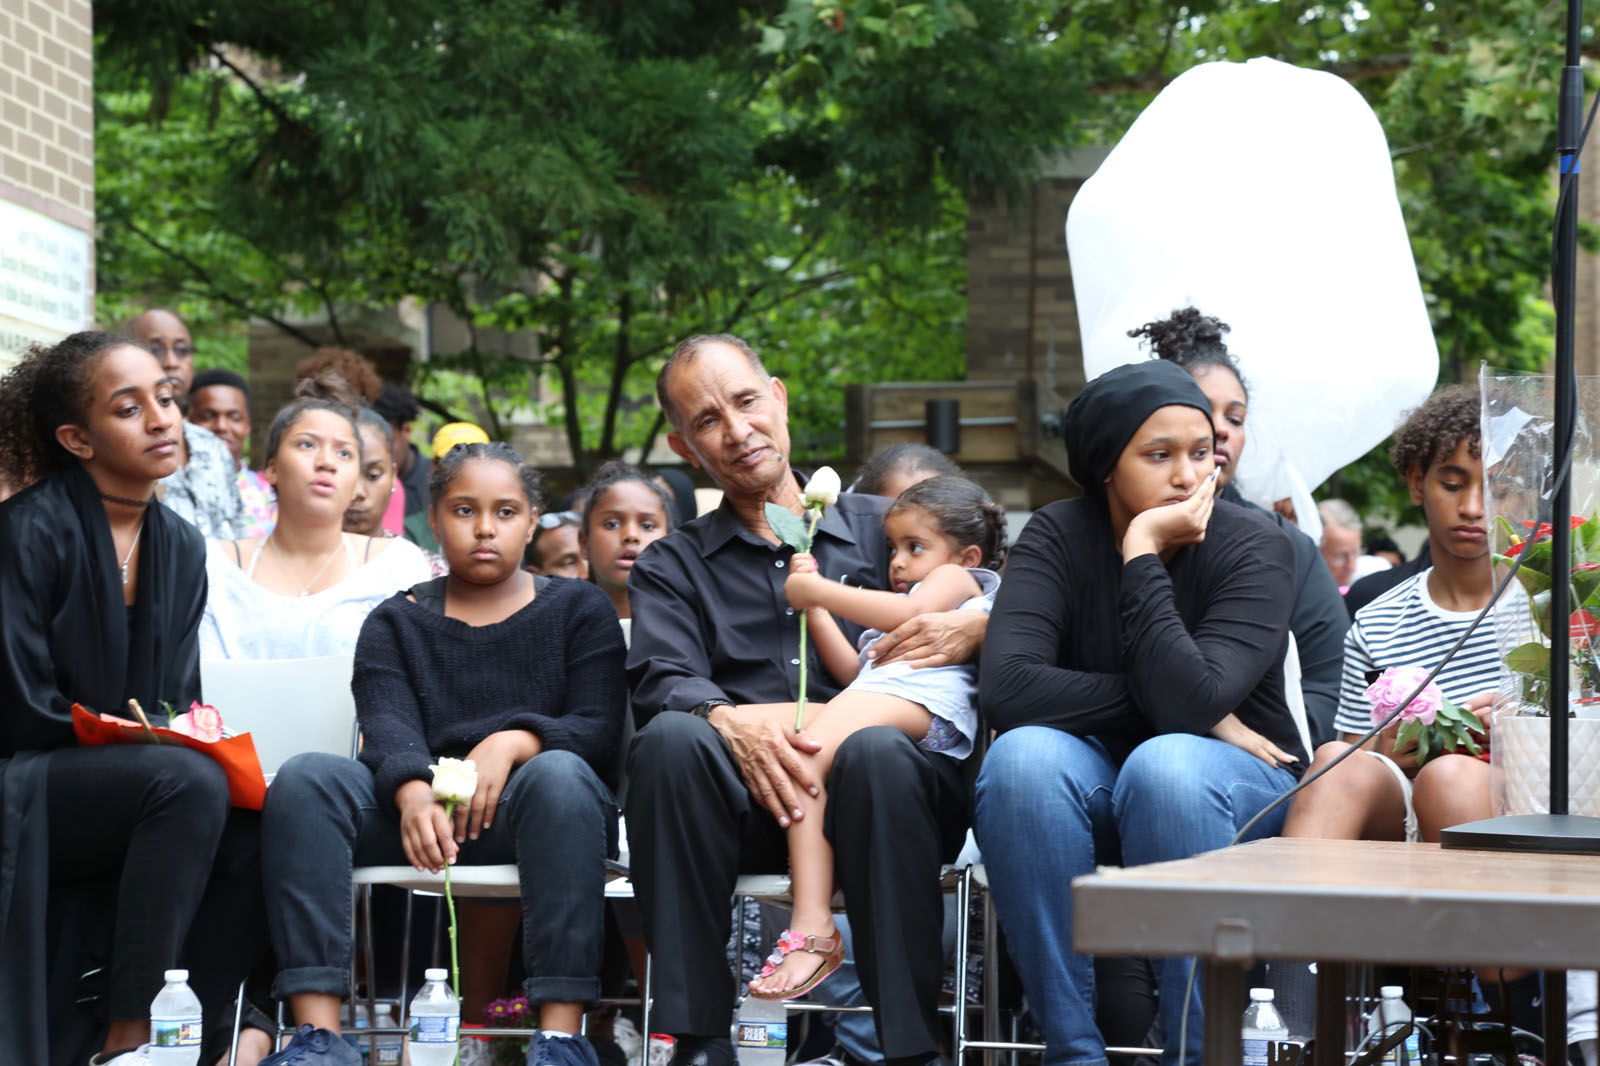 Nabra Hassanen's family looks on at a vigil in honor of Nabra on Wednesday, June 21, 2017, in Reston, Va. (WTOP/Omama Altaleb)